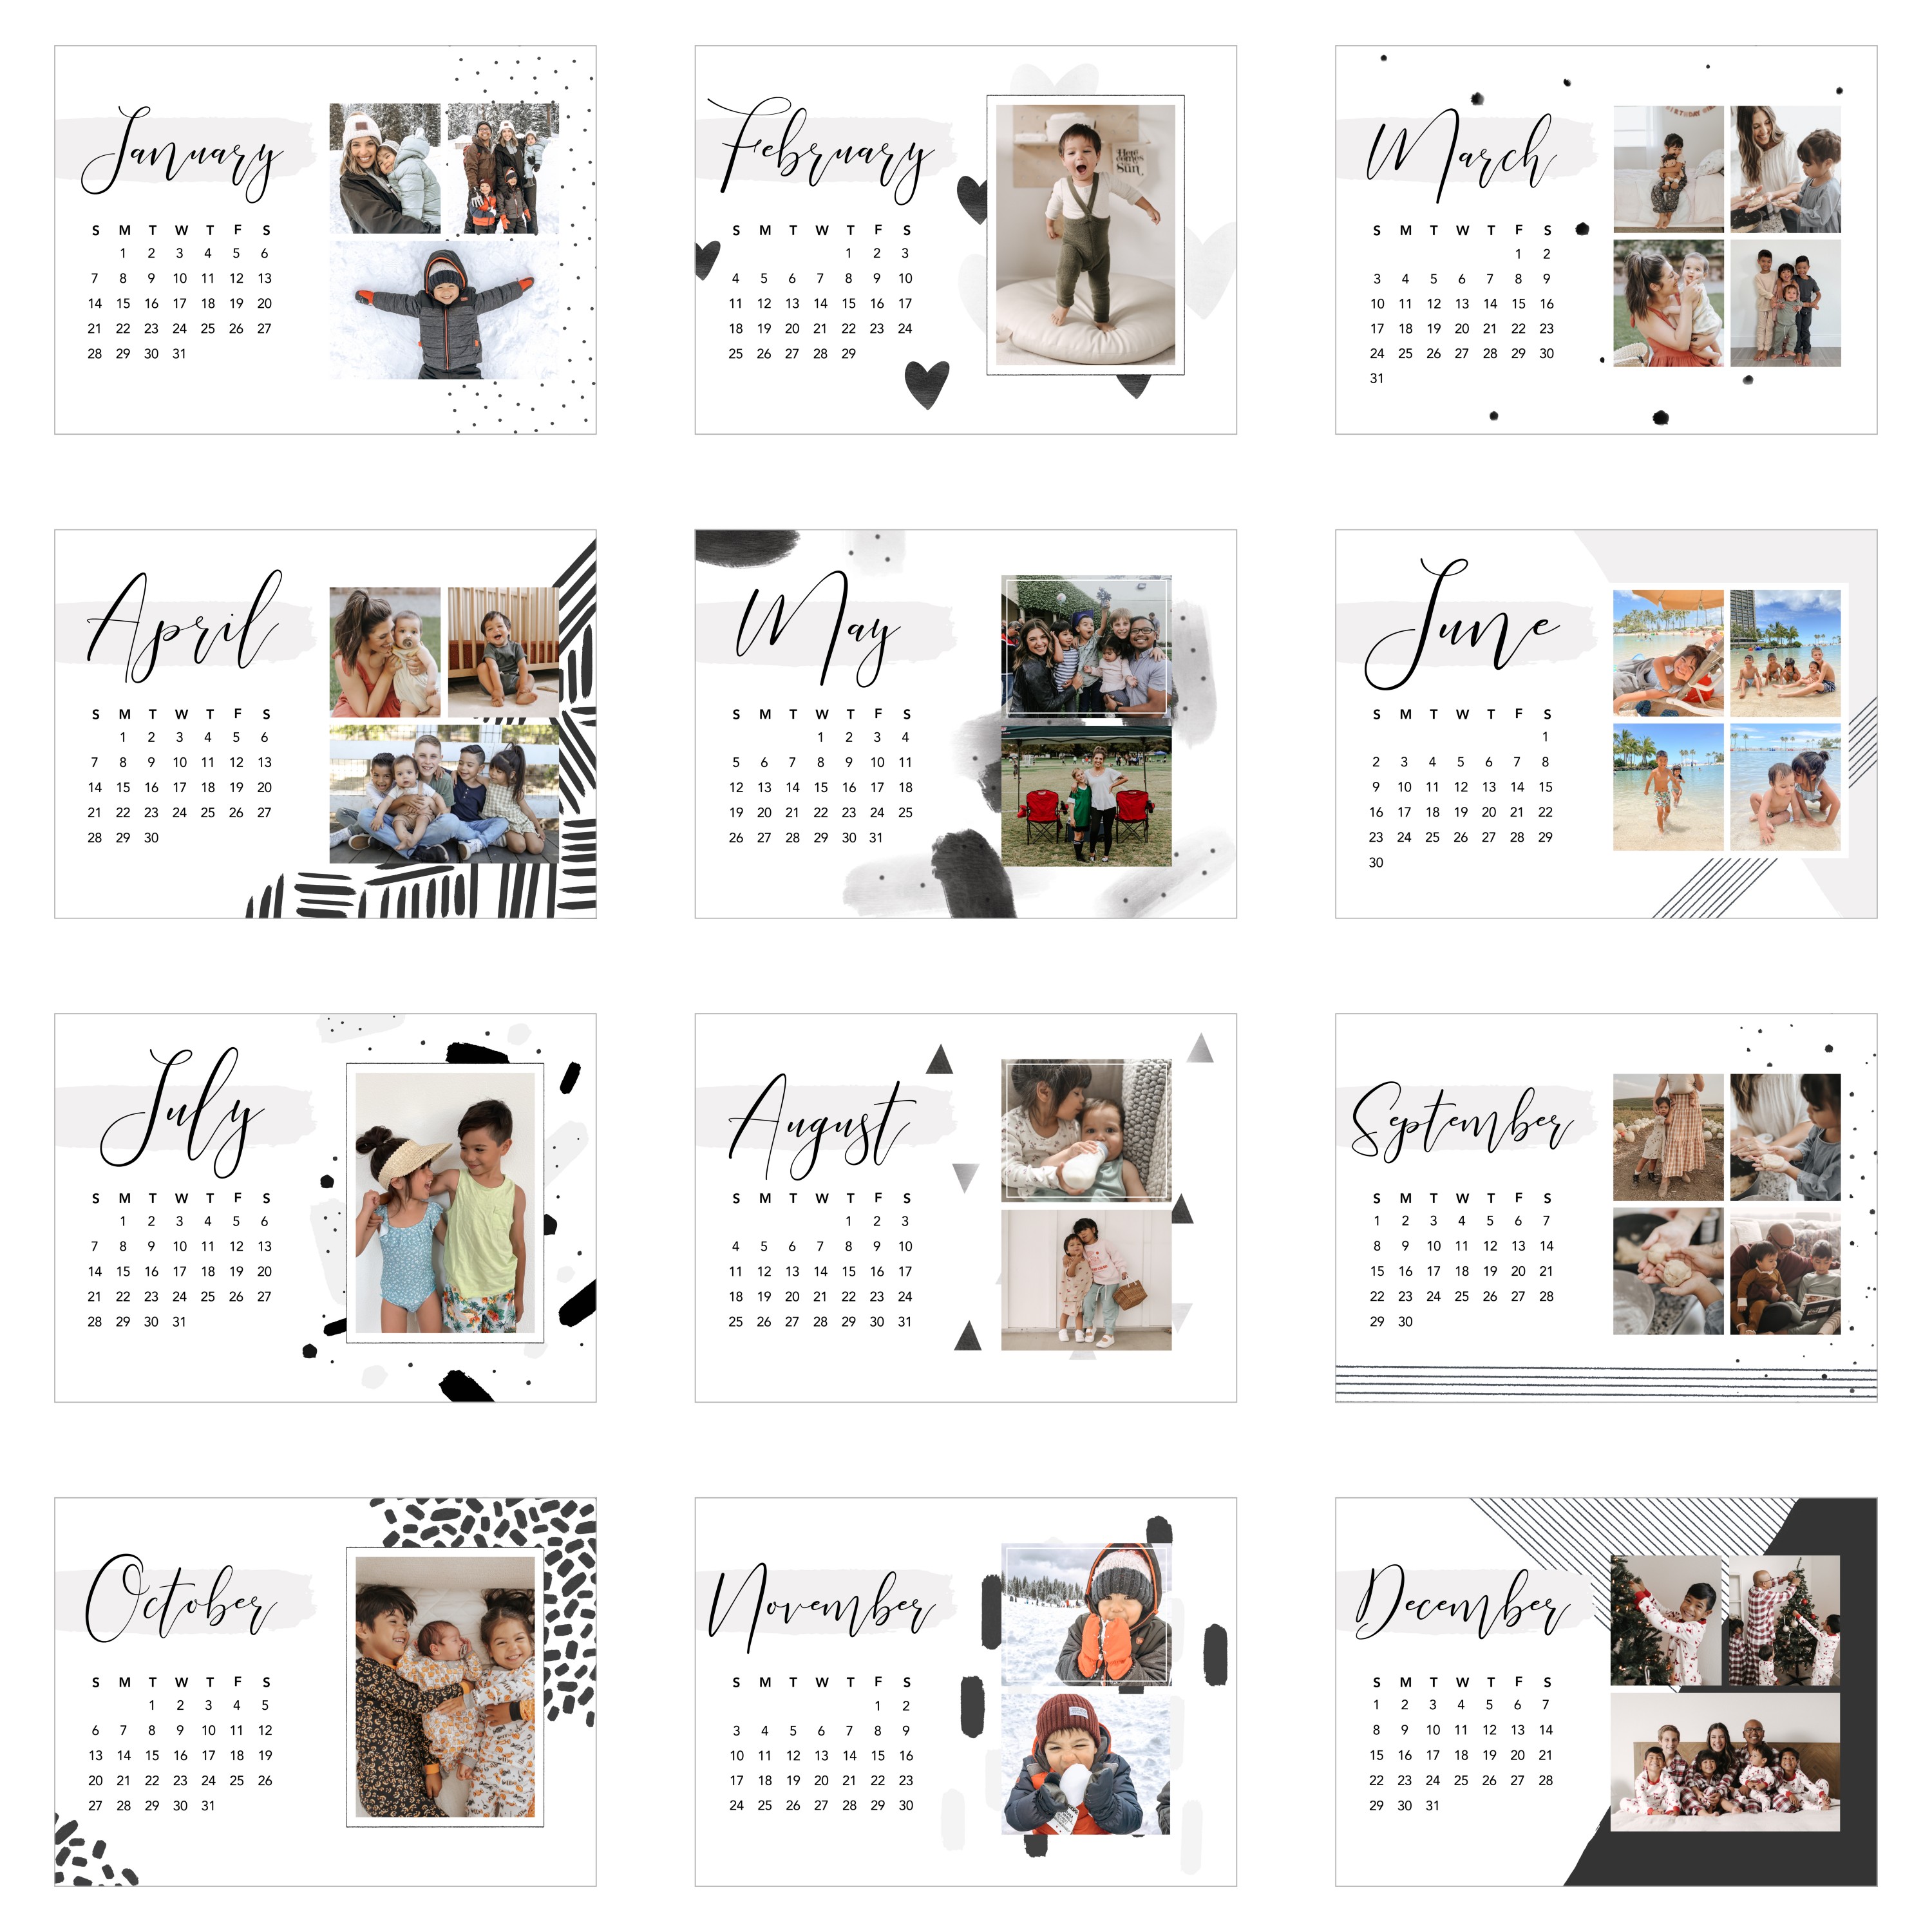 Black & White Patterns Easel Calendar by Yours Truly Shutterfly